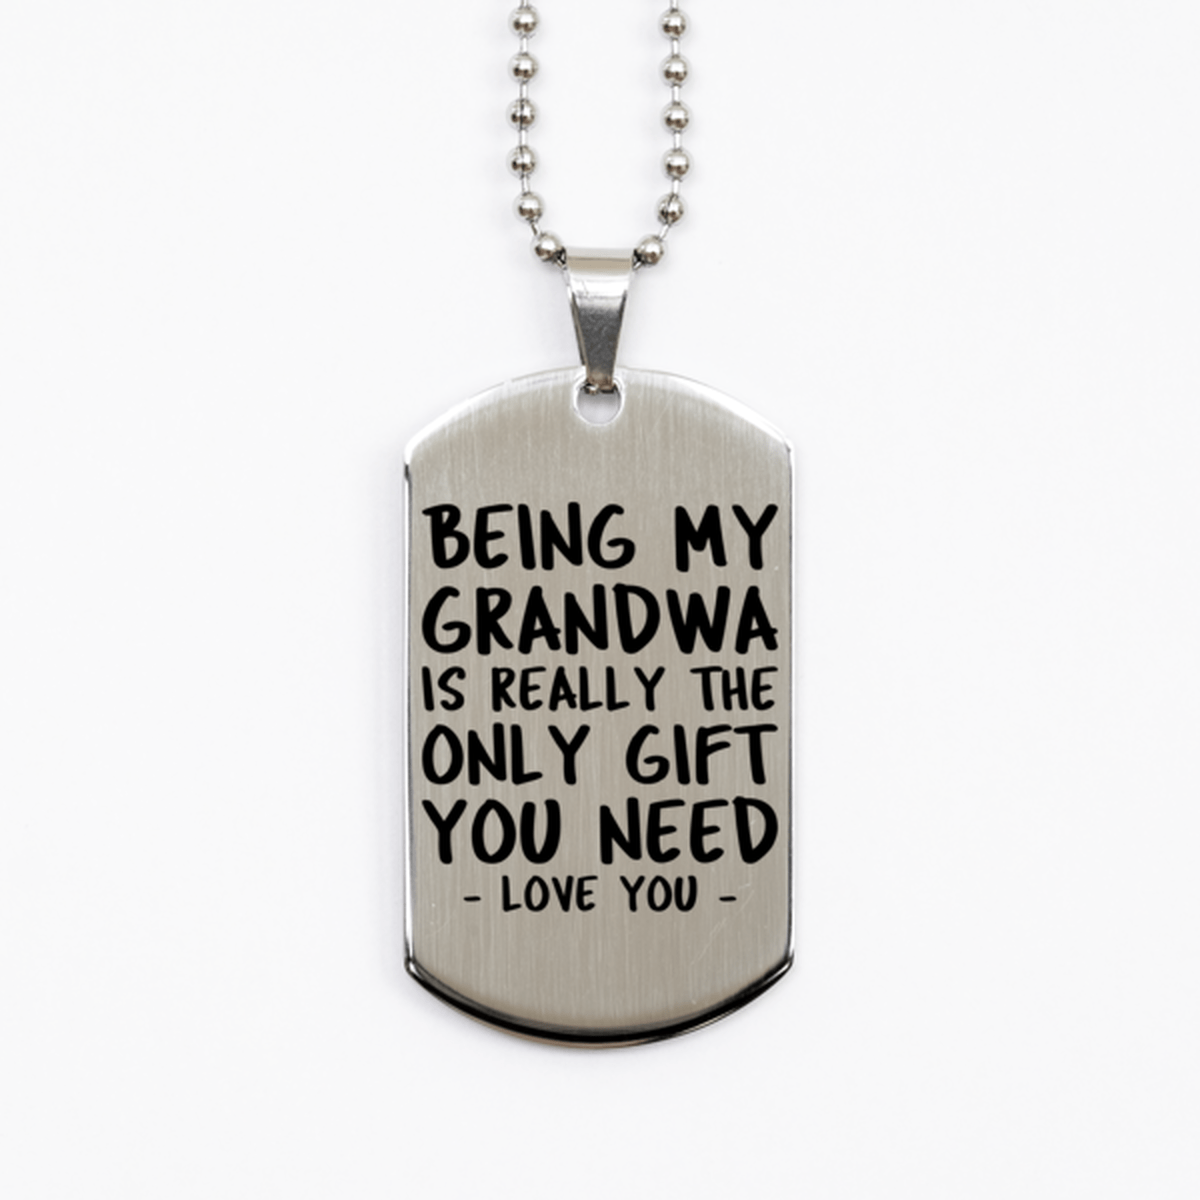 Funny Grandwa Silver Dog Tag Necklace, Being My Grandwa Is Really the Only Gift You Need, Best Birthday Gifts for Grandwa